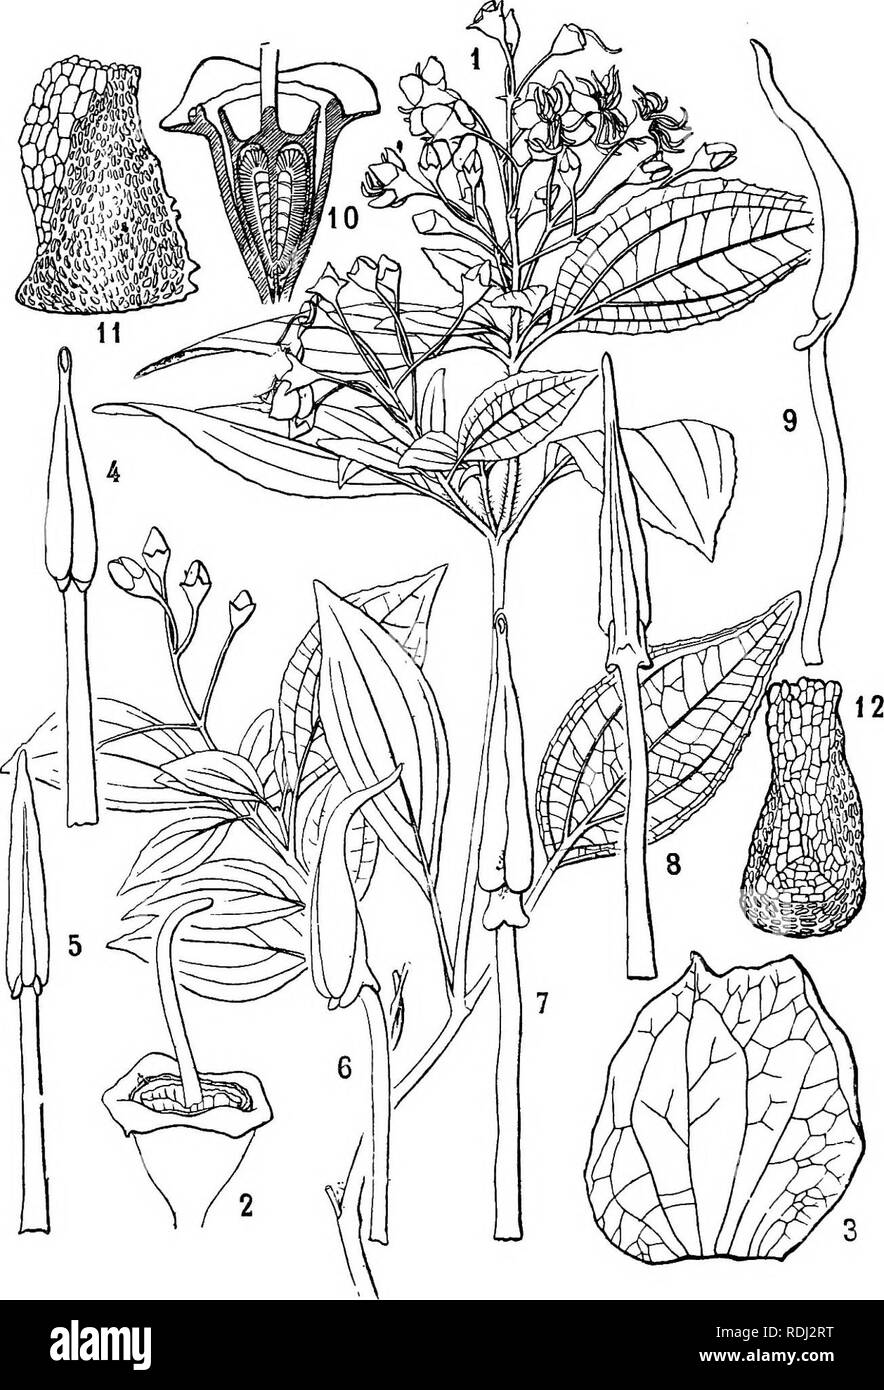 . Icones plantarum formosanarum nec non et contributiones ad floram formosanam; or, Icones of the plants of Formosa, and materials for a flora of the island, based on a study of the collections of the Botanical survey of the Government of Formosa. Botany. 122 MELASTOMACE^.. Fig. 20. Bredia Oldhami Hook, f. 1, a branch; 2, a flower, stamens and petals taken ofE; 3, u petal; 4, 5, 6, stamens of one kind, seen from difierent sides; 7, 8, 9, stamens of the other kind, seen from different sides; 10, an ovary, in vertical section; 11, 12, seeds, seen from difEerent sides. 1, x §; 2-12 more or less m Stock Photo